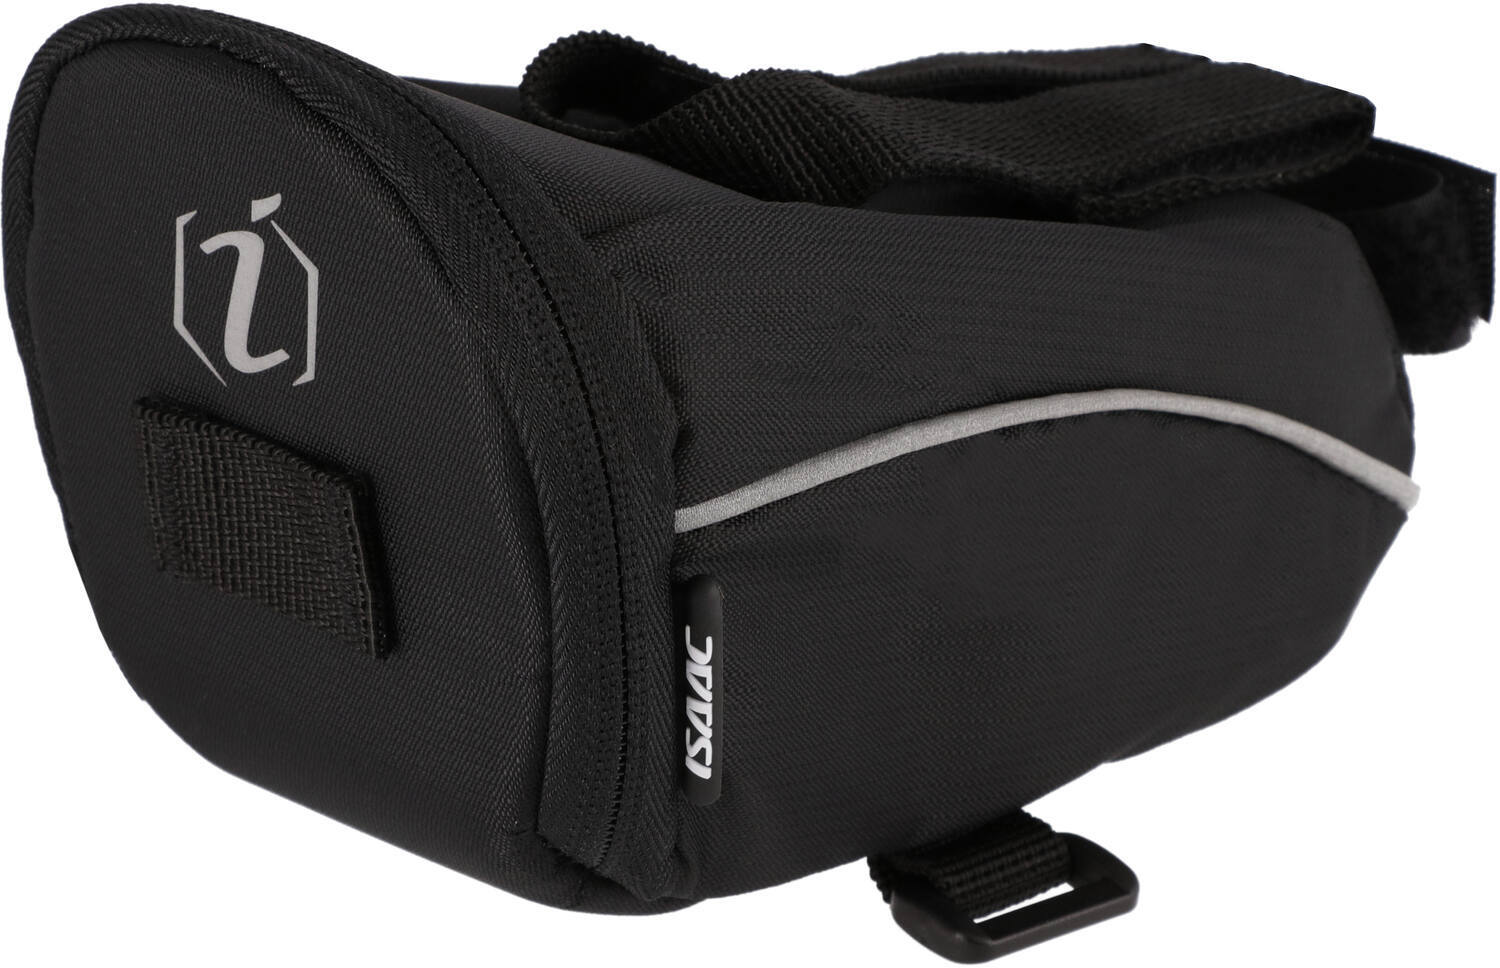 Isaac - Ready to Ride Saddlebag Cave M + Inner tube + CO2 adapter + Cartridge + Multitool 10 in 1 benefit package